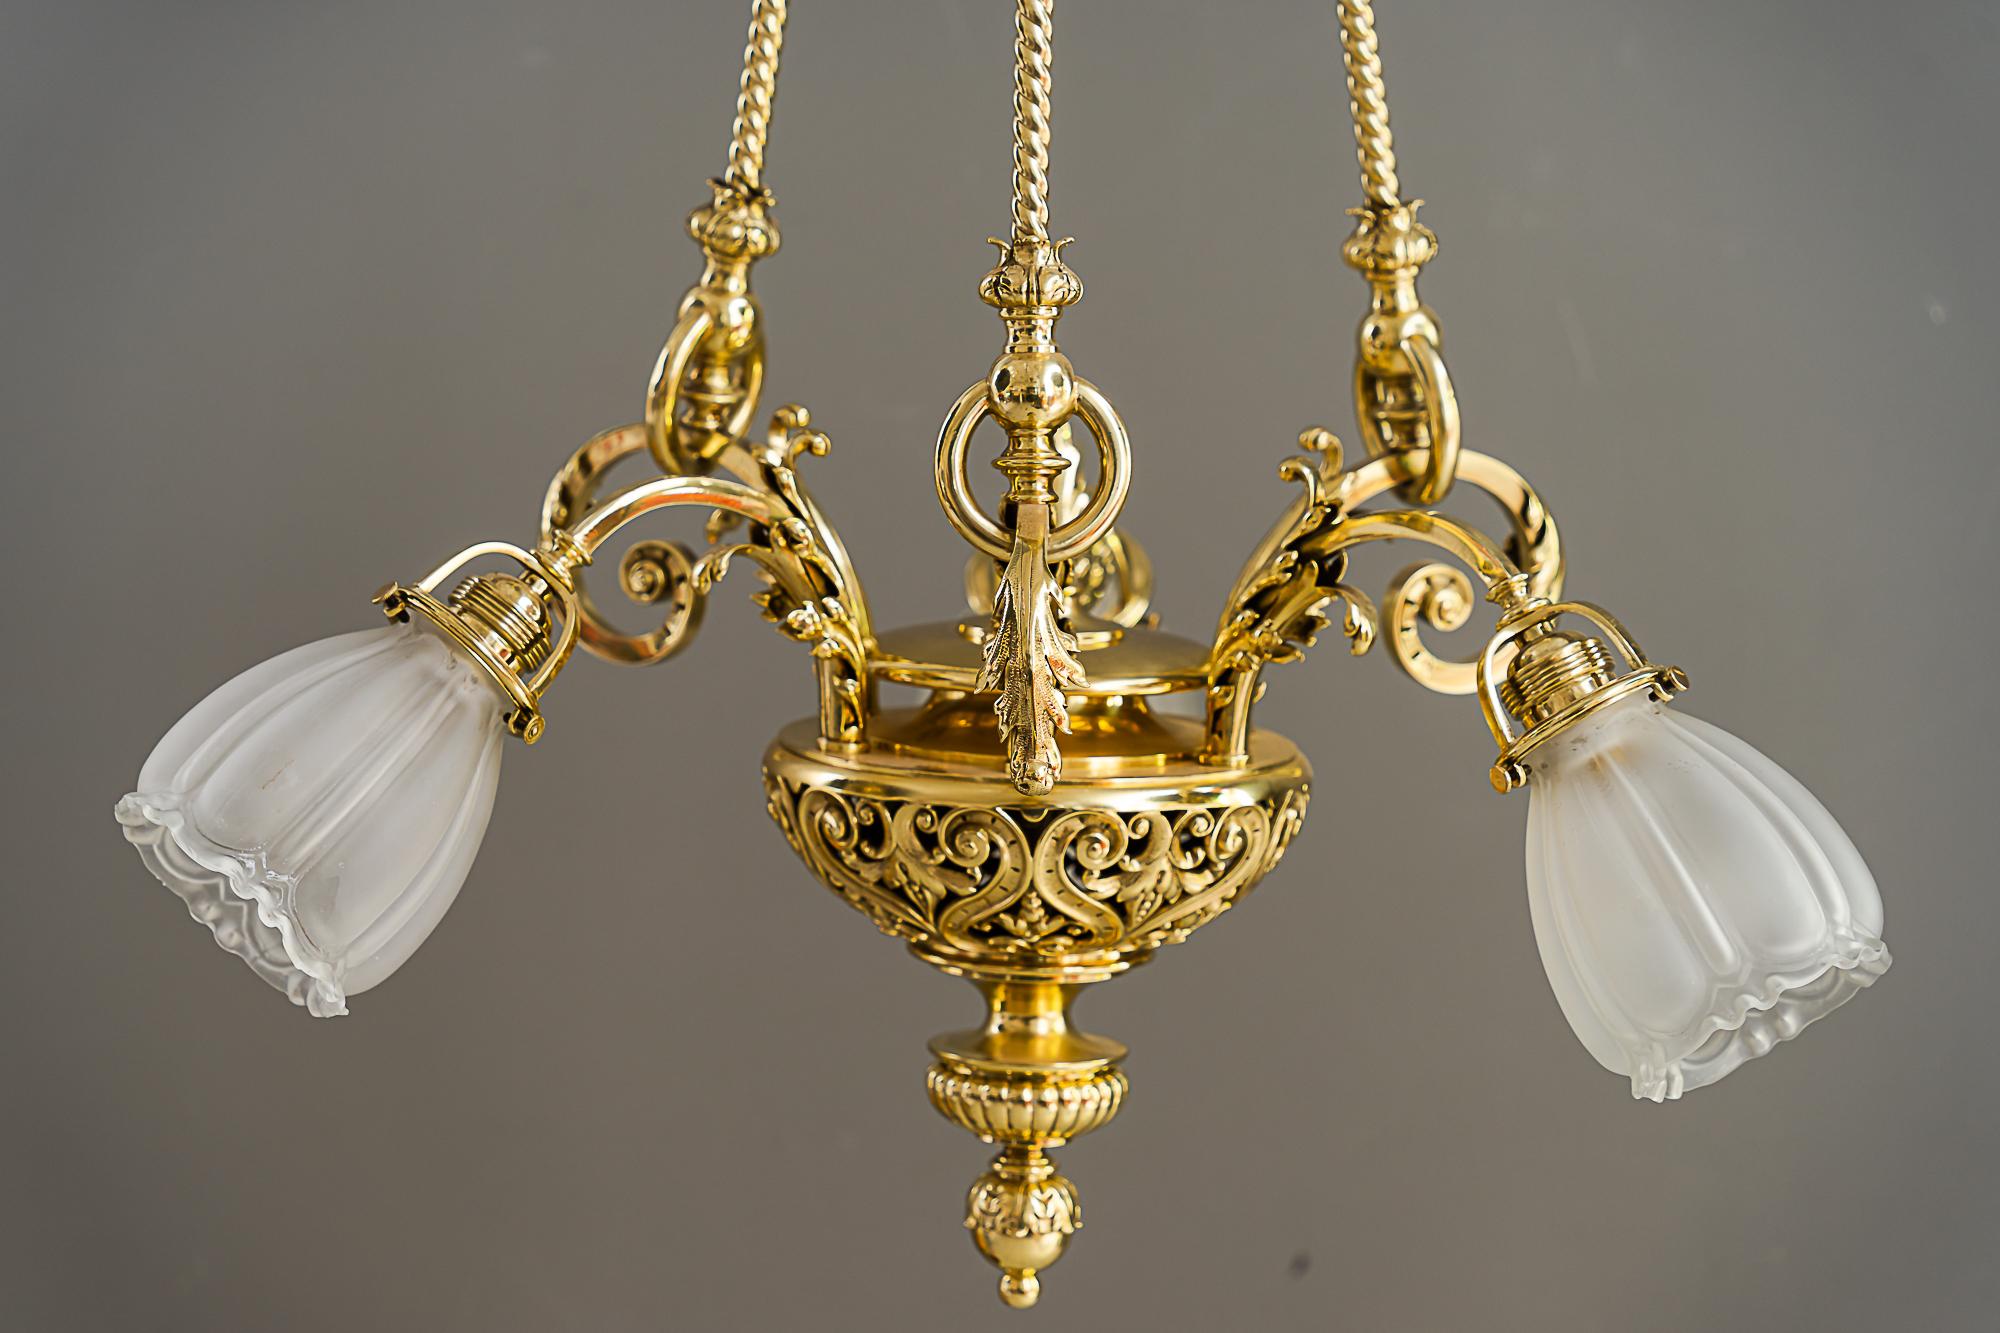 Historistic chandelier vienna around 1890s with original antique glass shades
Polished and stove enameled
original antique glass shades